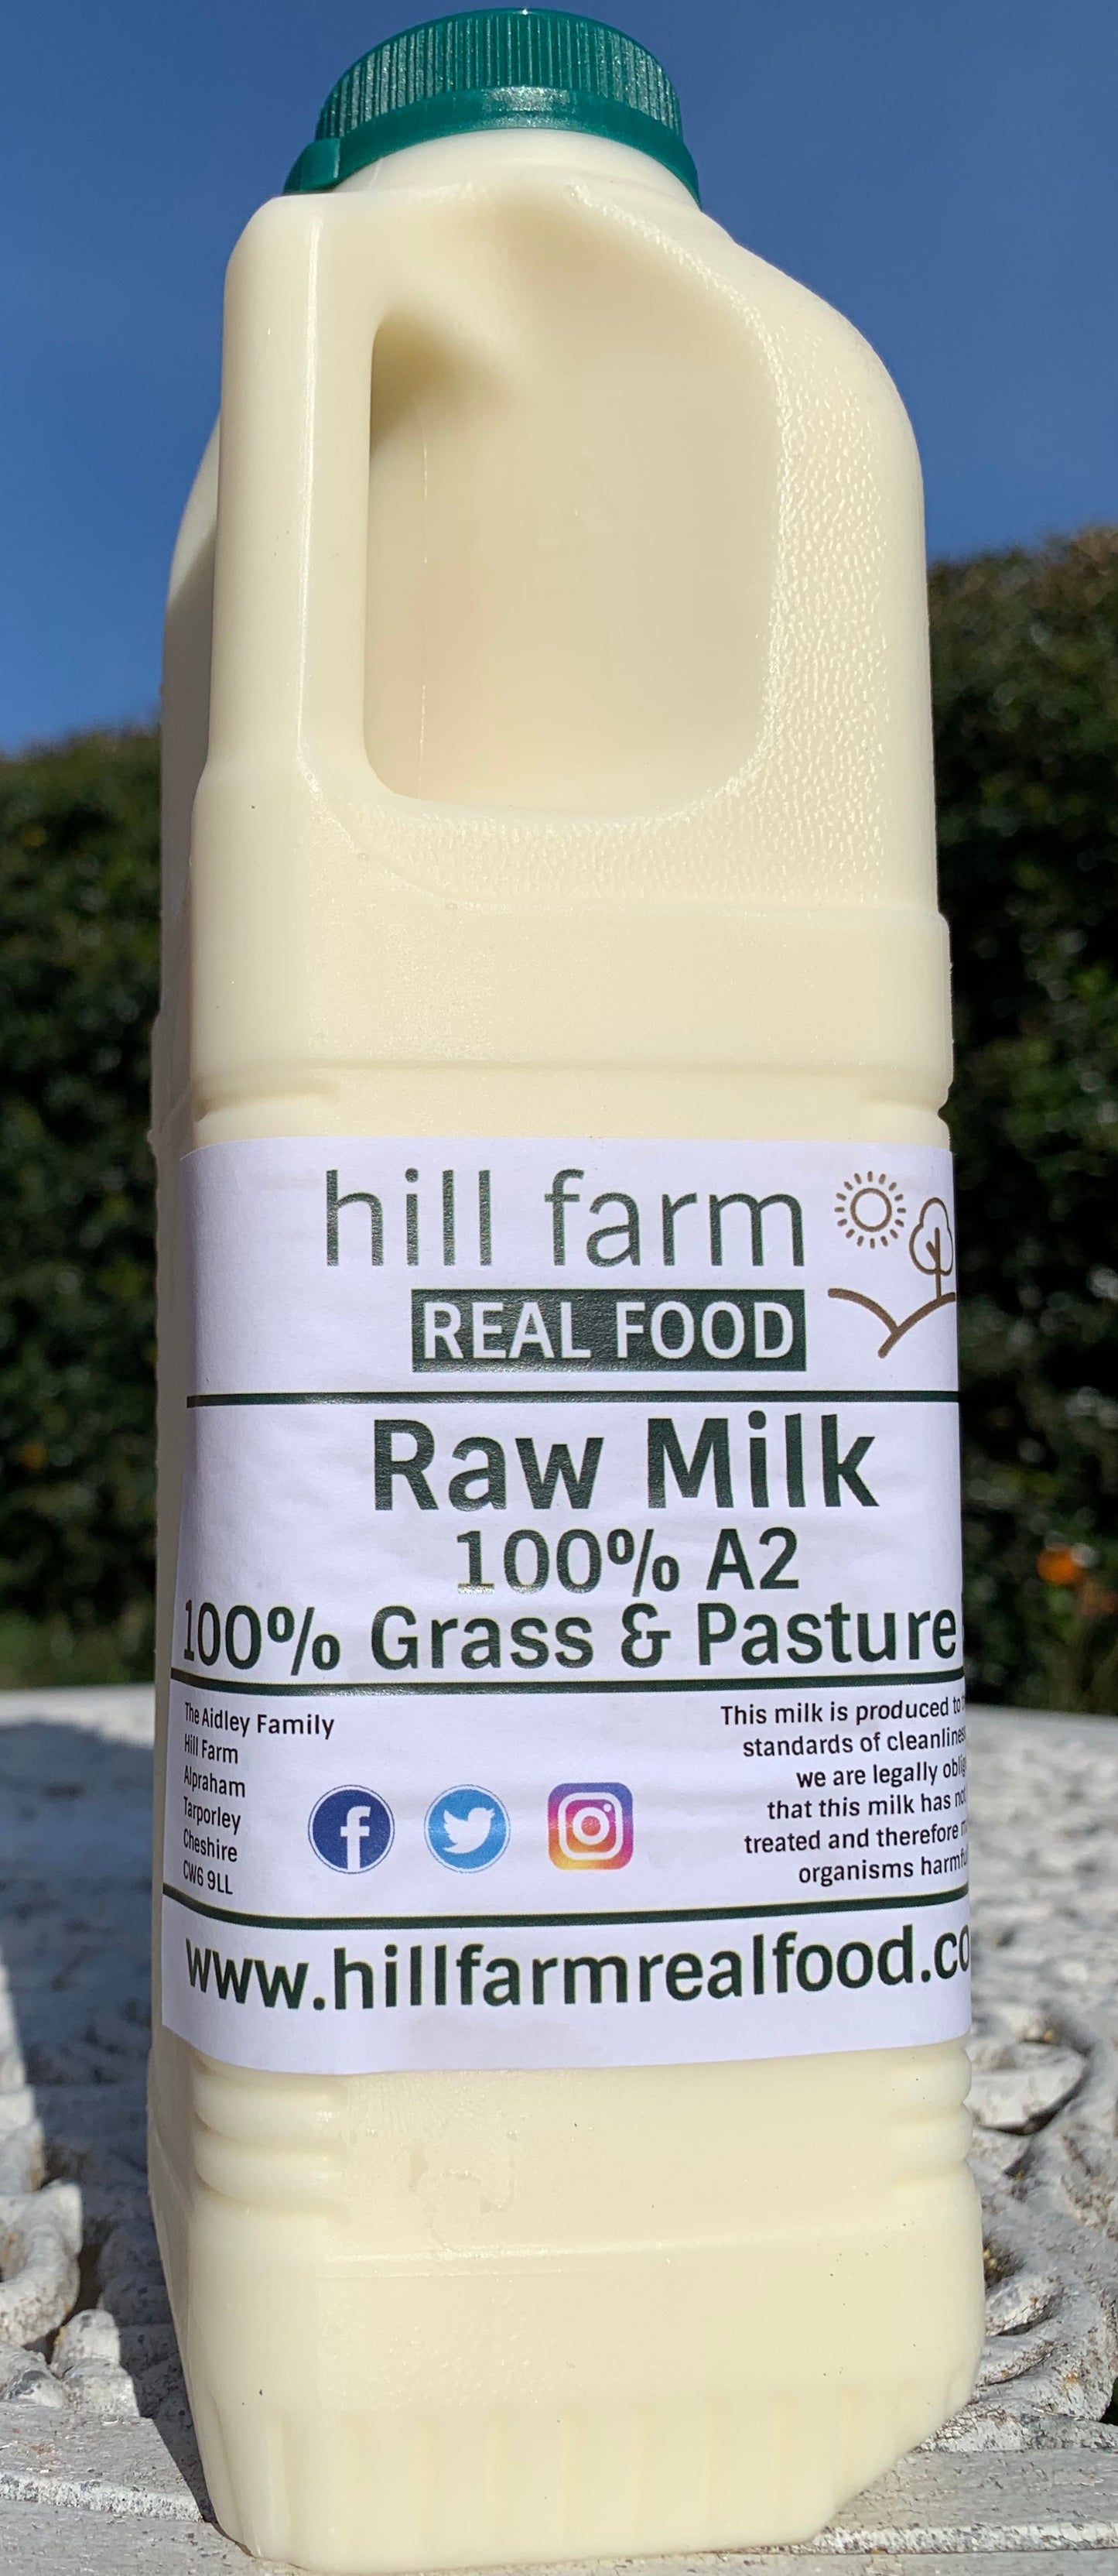 Raw Organic A2 Grass Fed milk - 12 x 1 litre bottle bundle (INCLUDES COURIER DELIVERY)